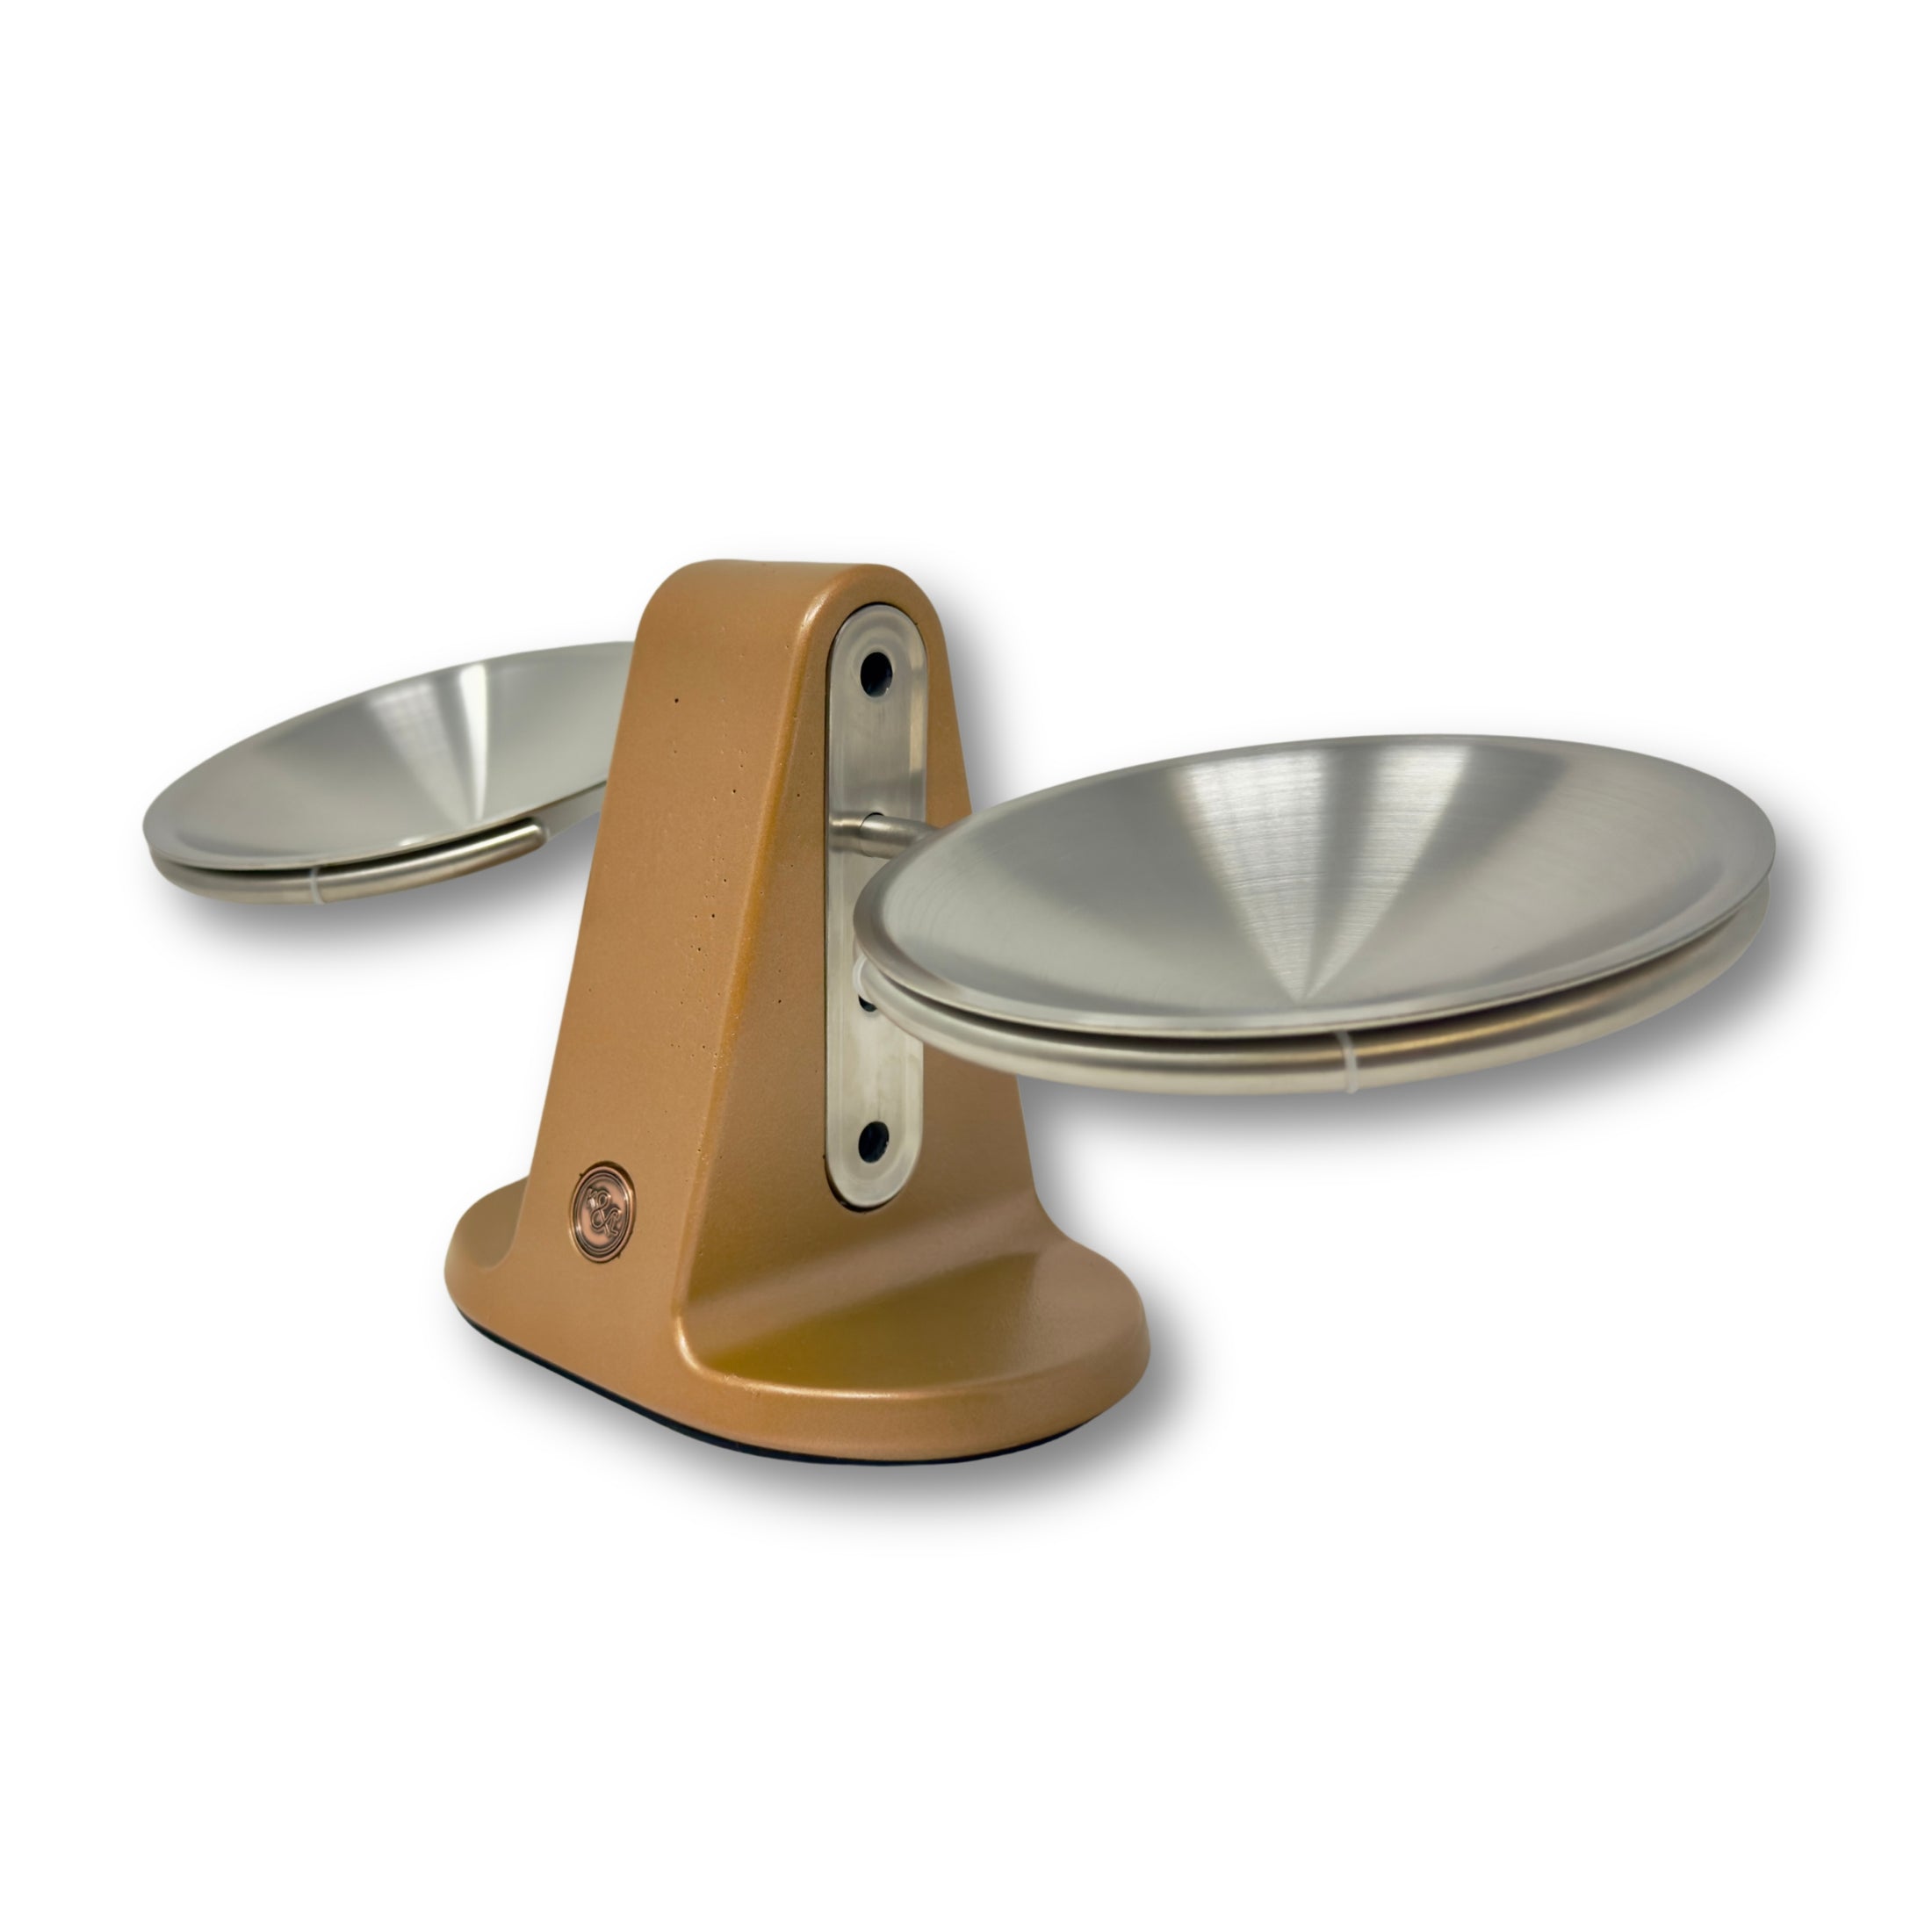 Dine Height Adjustable Cat Food Bowl Copper and Silver